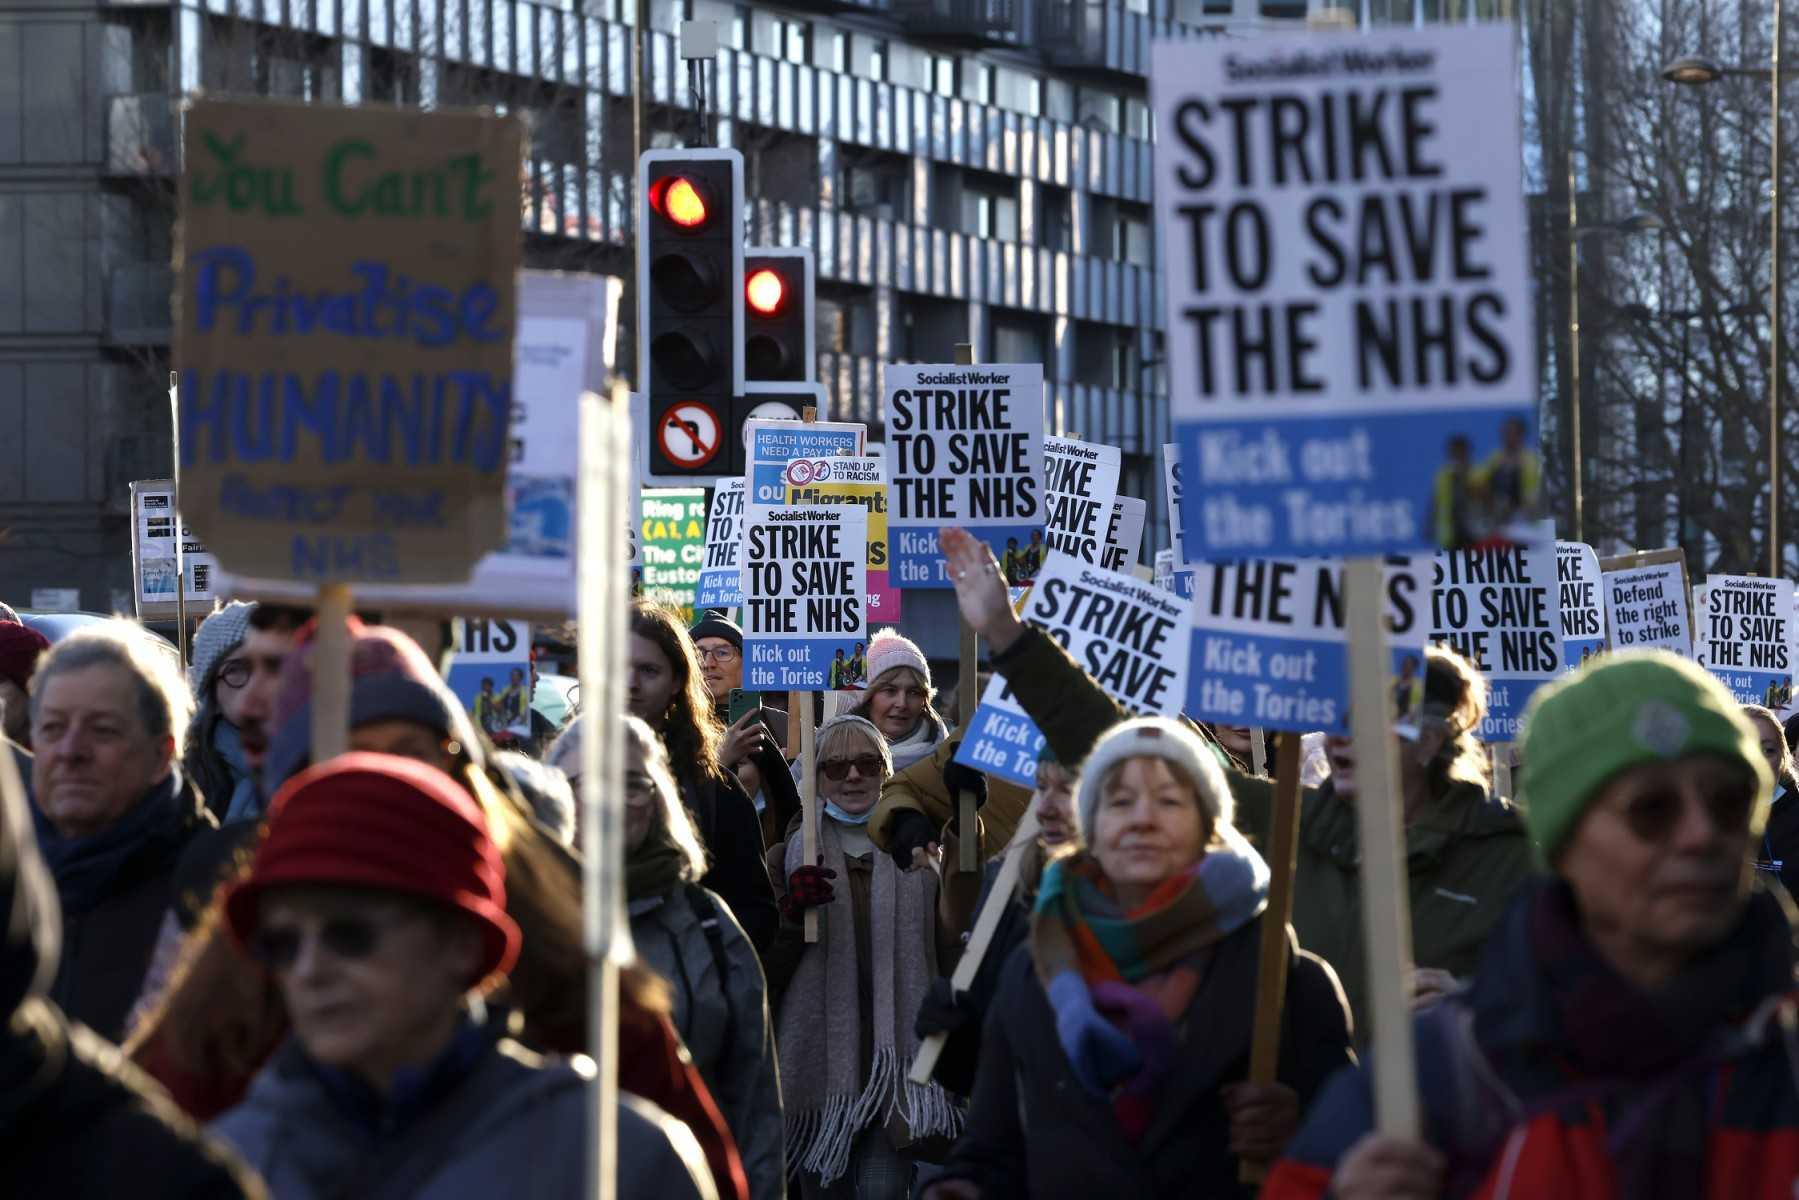 People hold placards as they take part in a protest march organised in London on Jan 18, in support of ongoing pay disputes. Photo: AFP